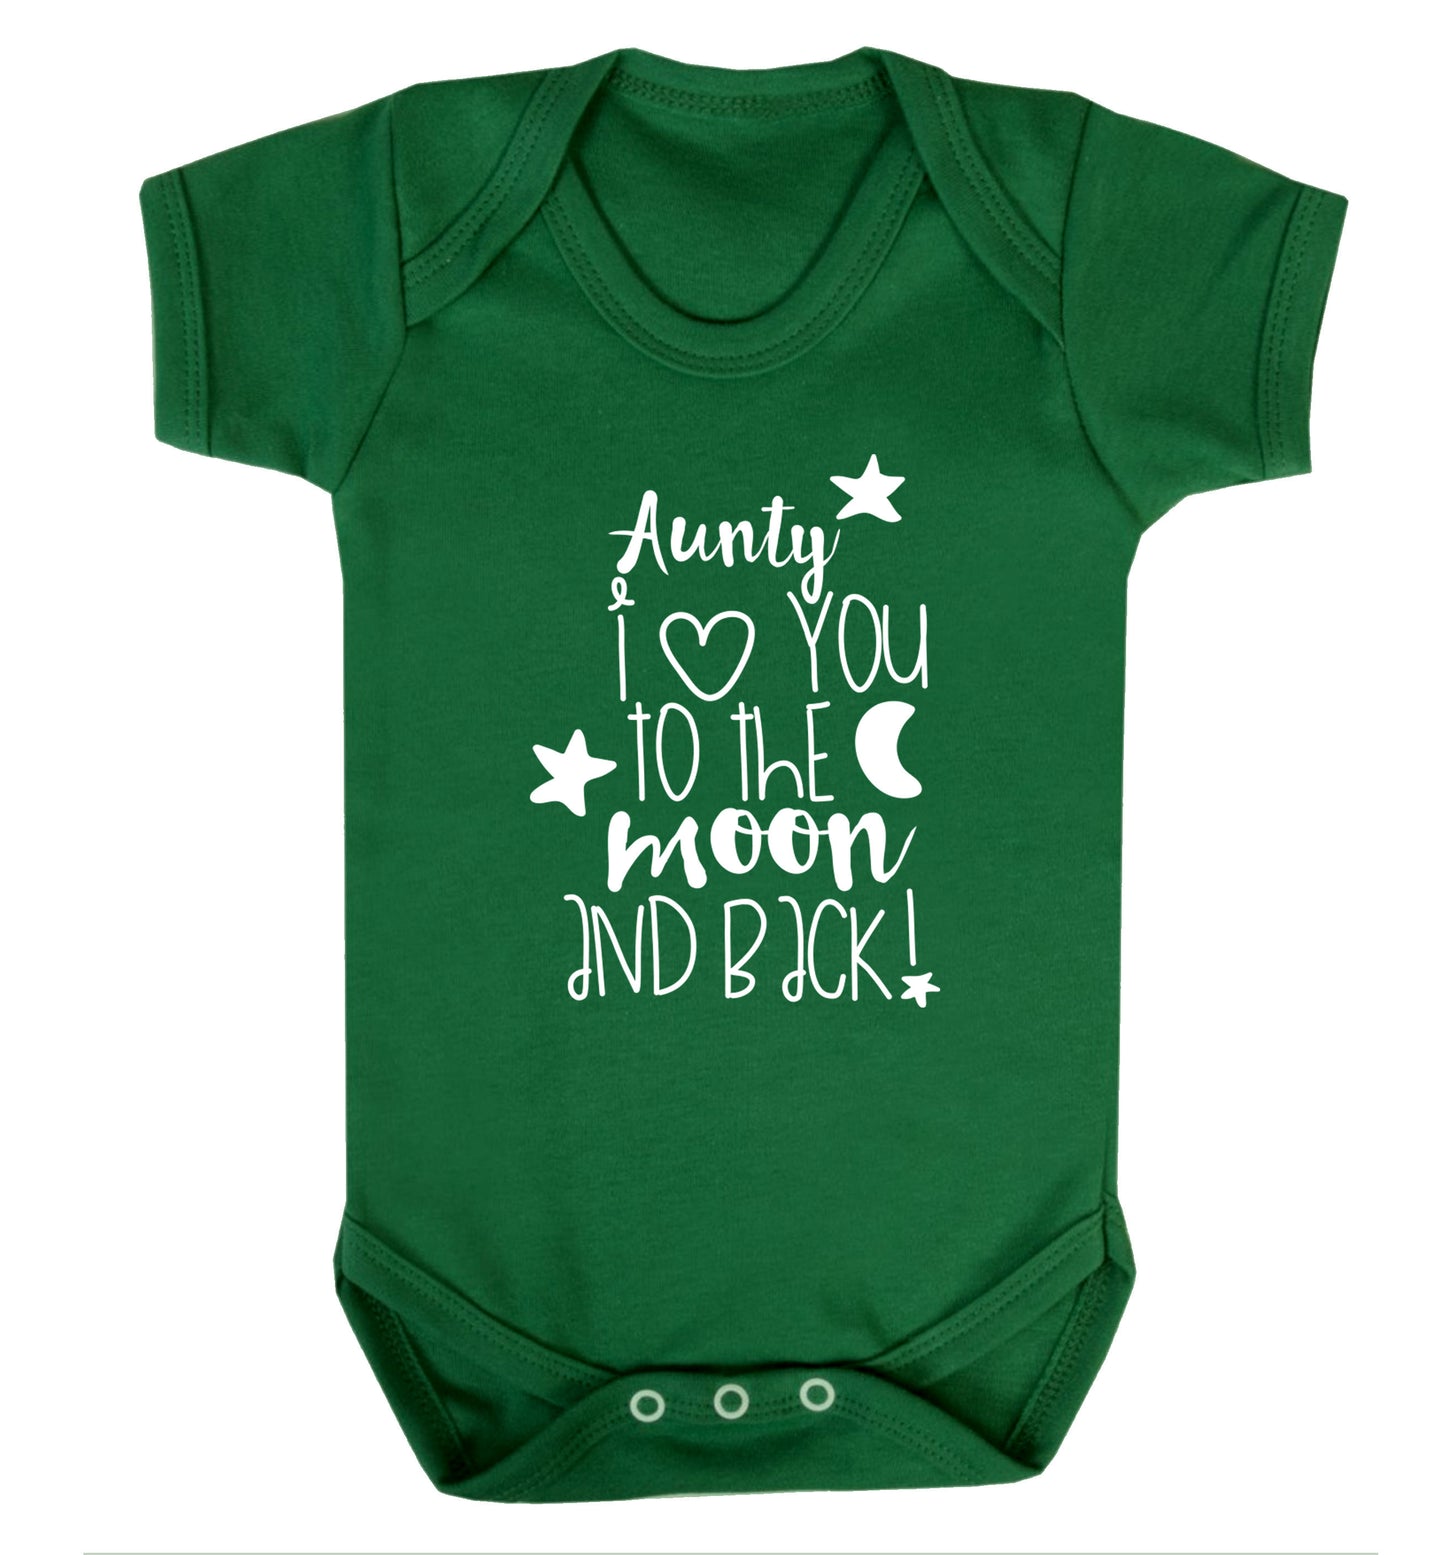 Aunty I love you to the moon and back Baby Vest green 18-24 months